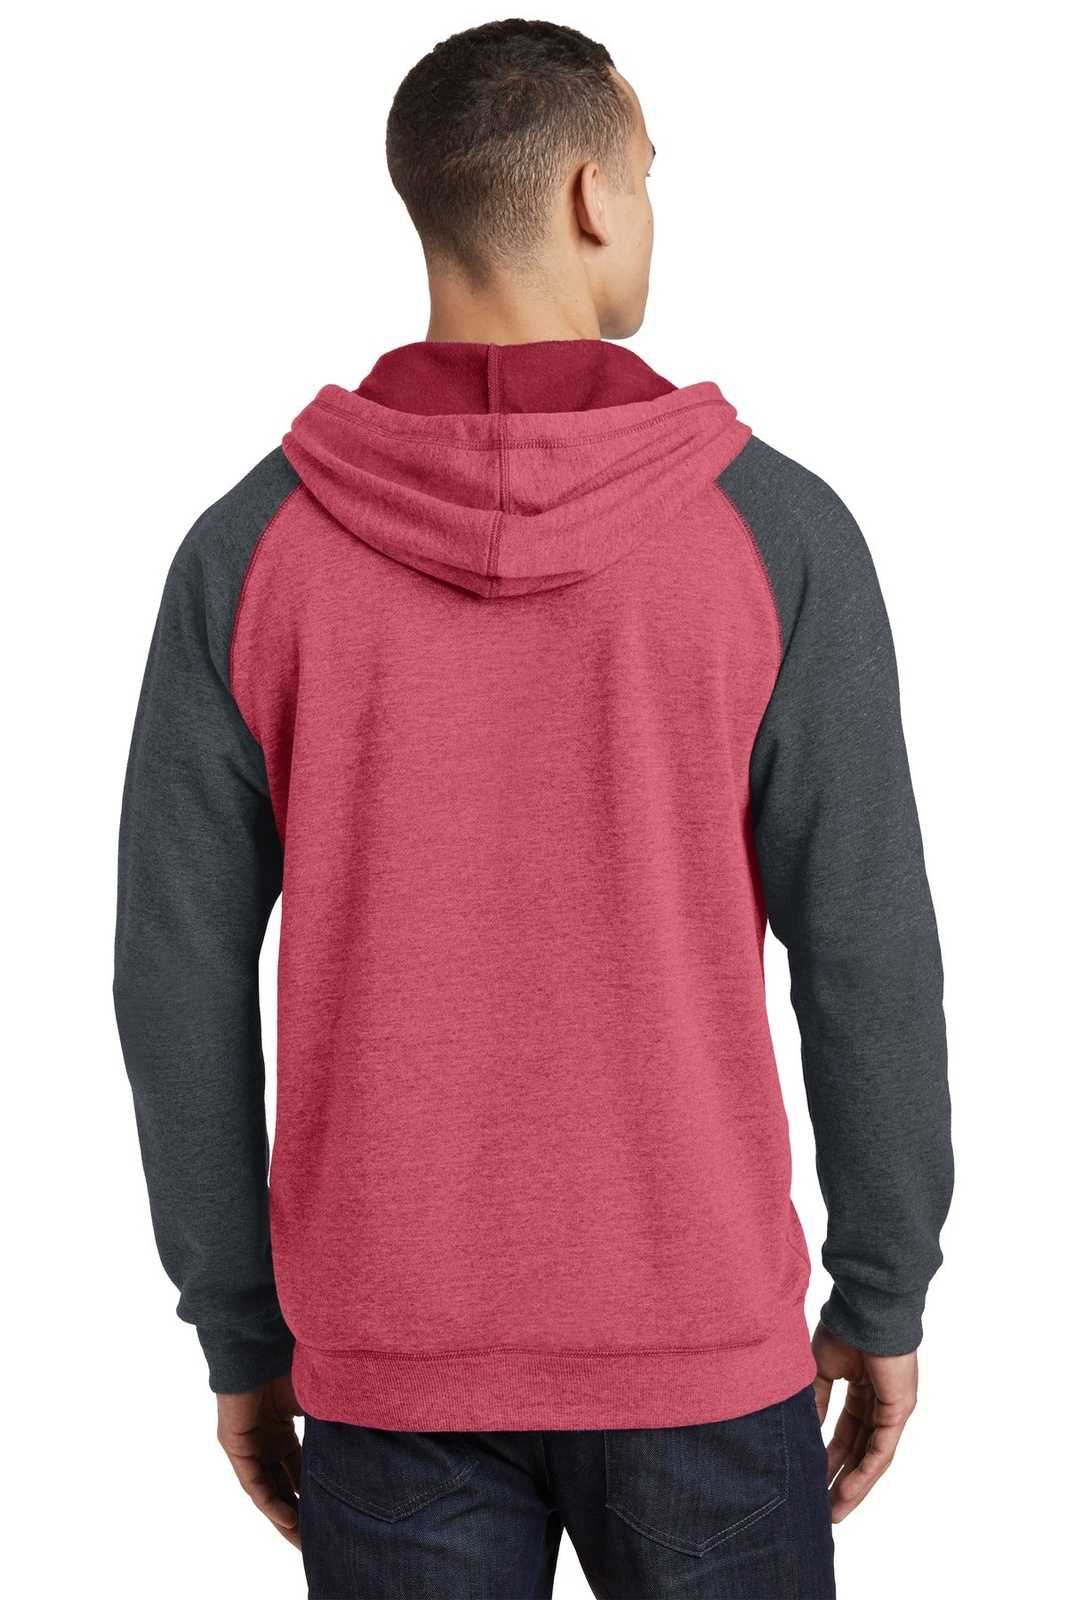 District DT196 Young Mens Lightweight Fleece Raglan Hoodie - Heathered Red Heathered Charcoal - HIT a Double - 1